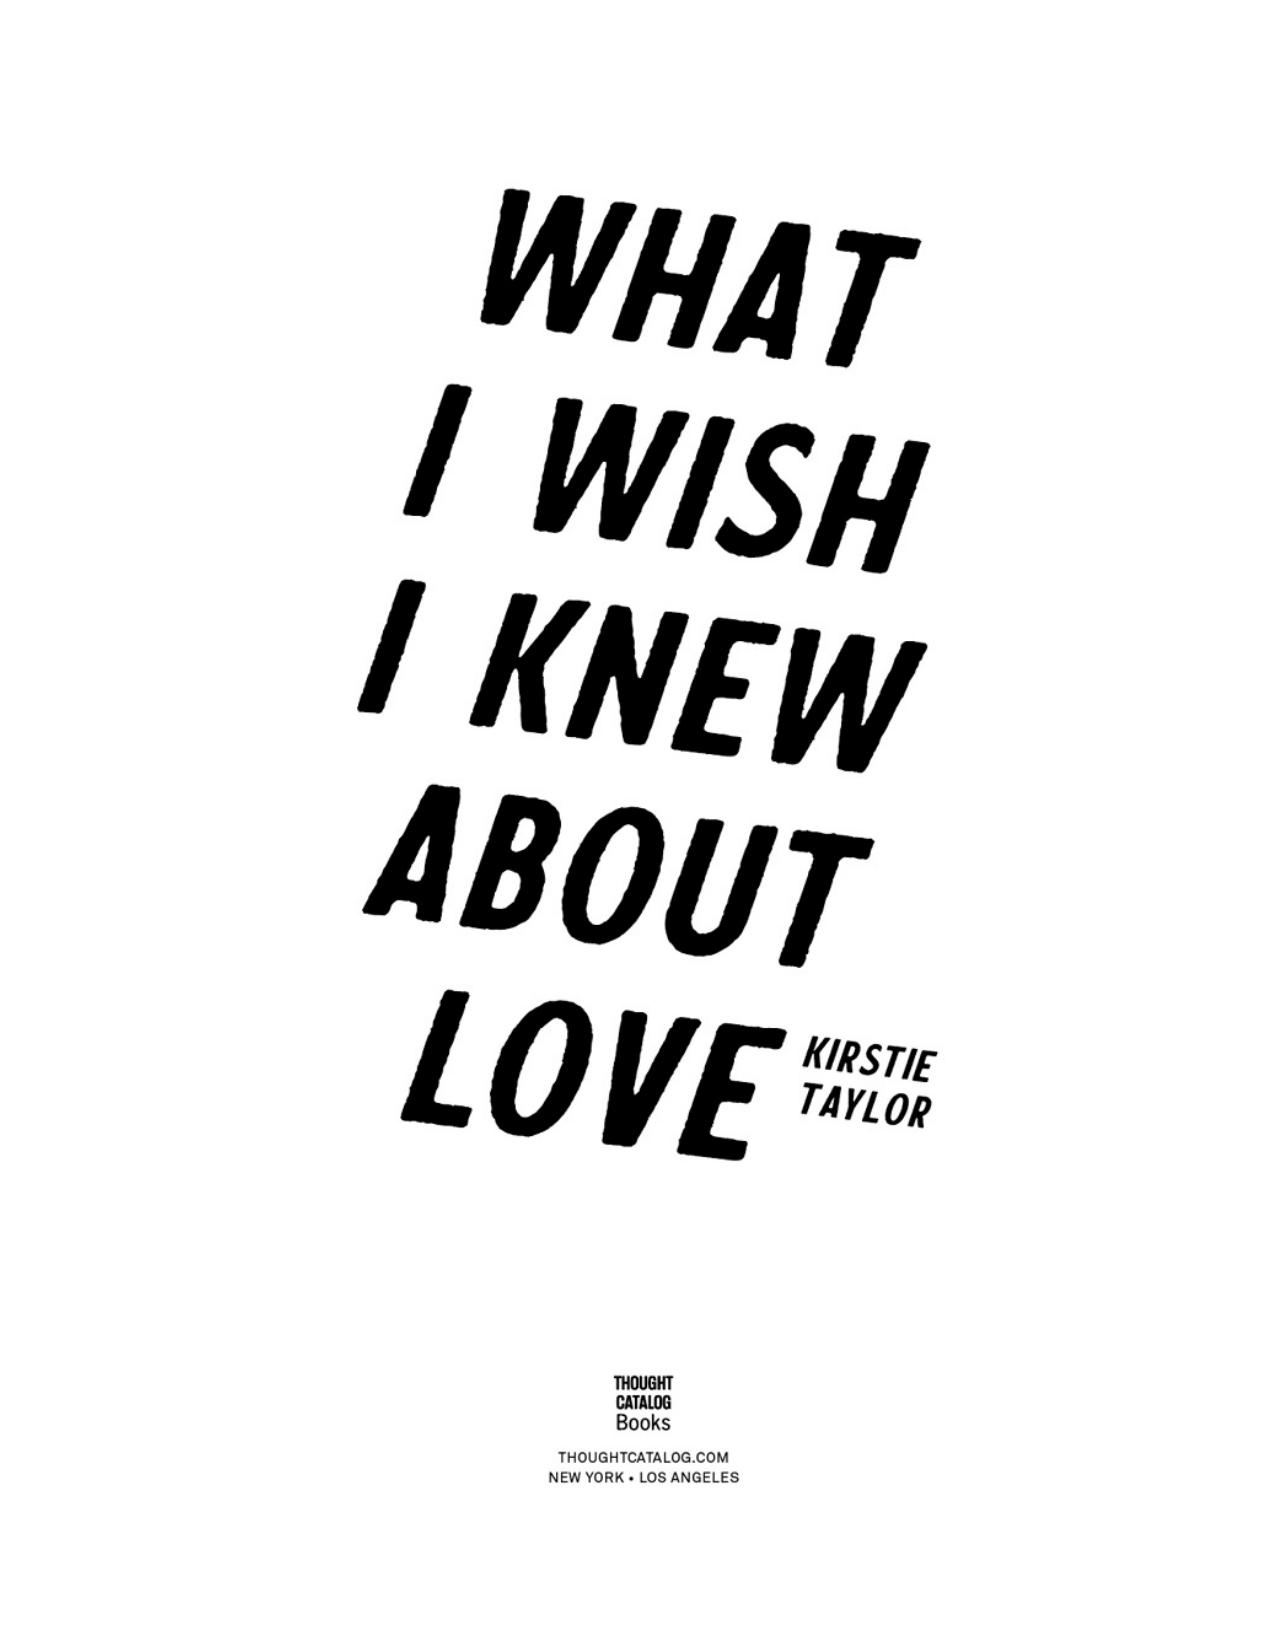 What I Wish I Knew About Love by Kirstie Taylor